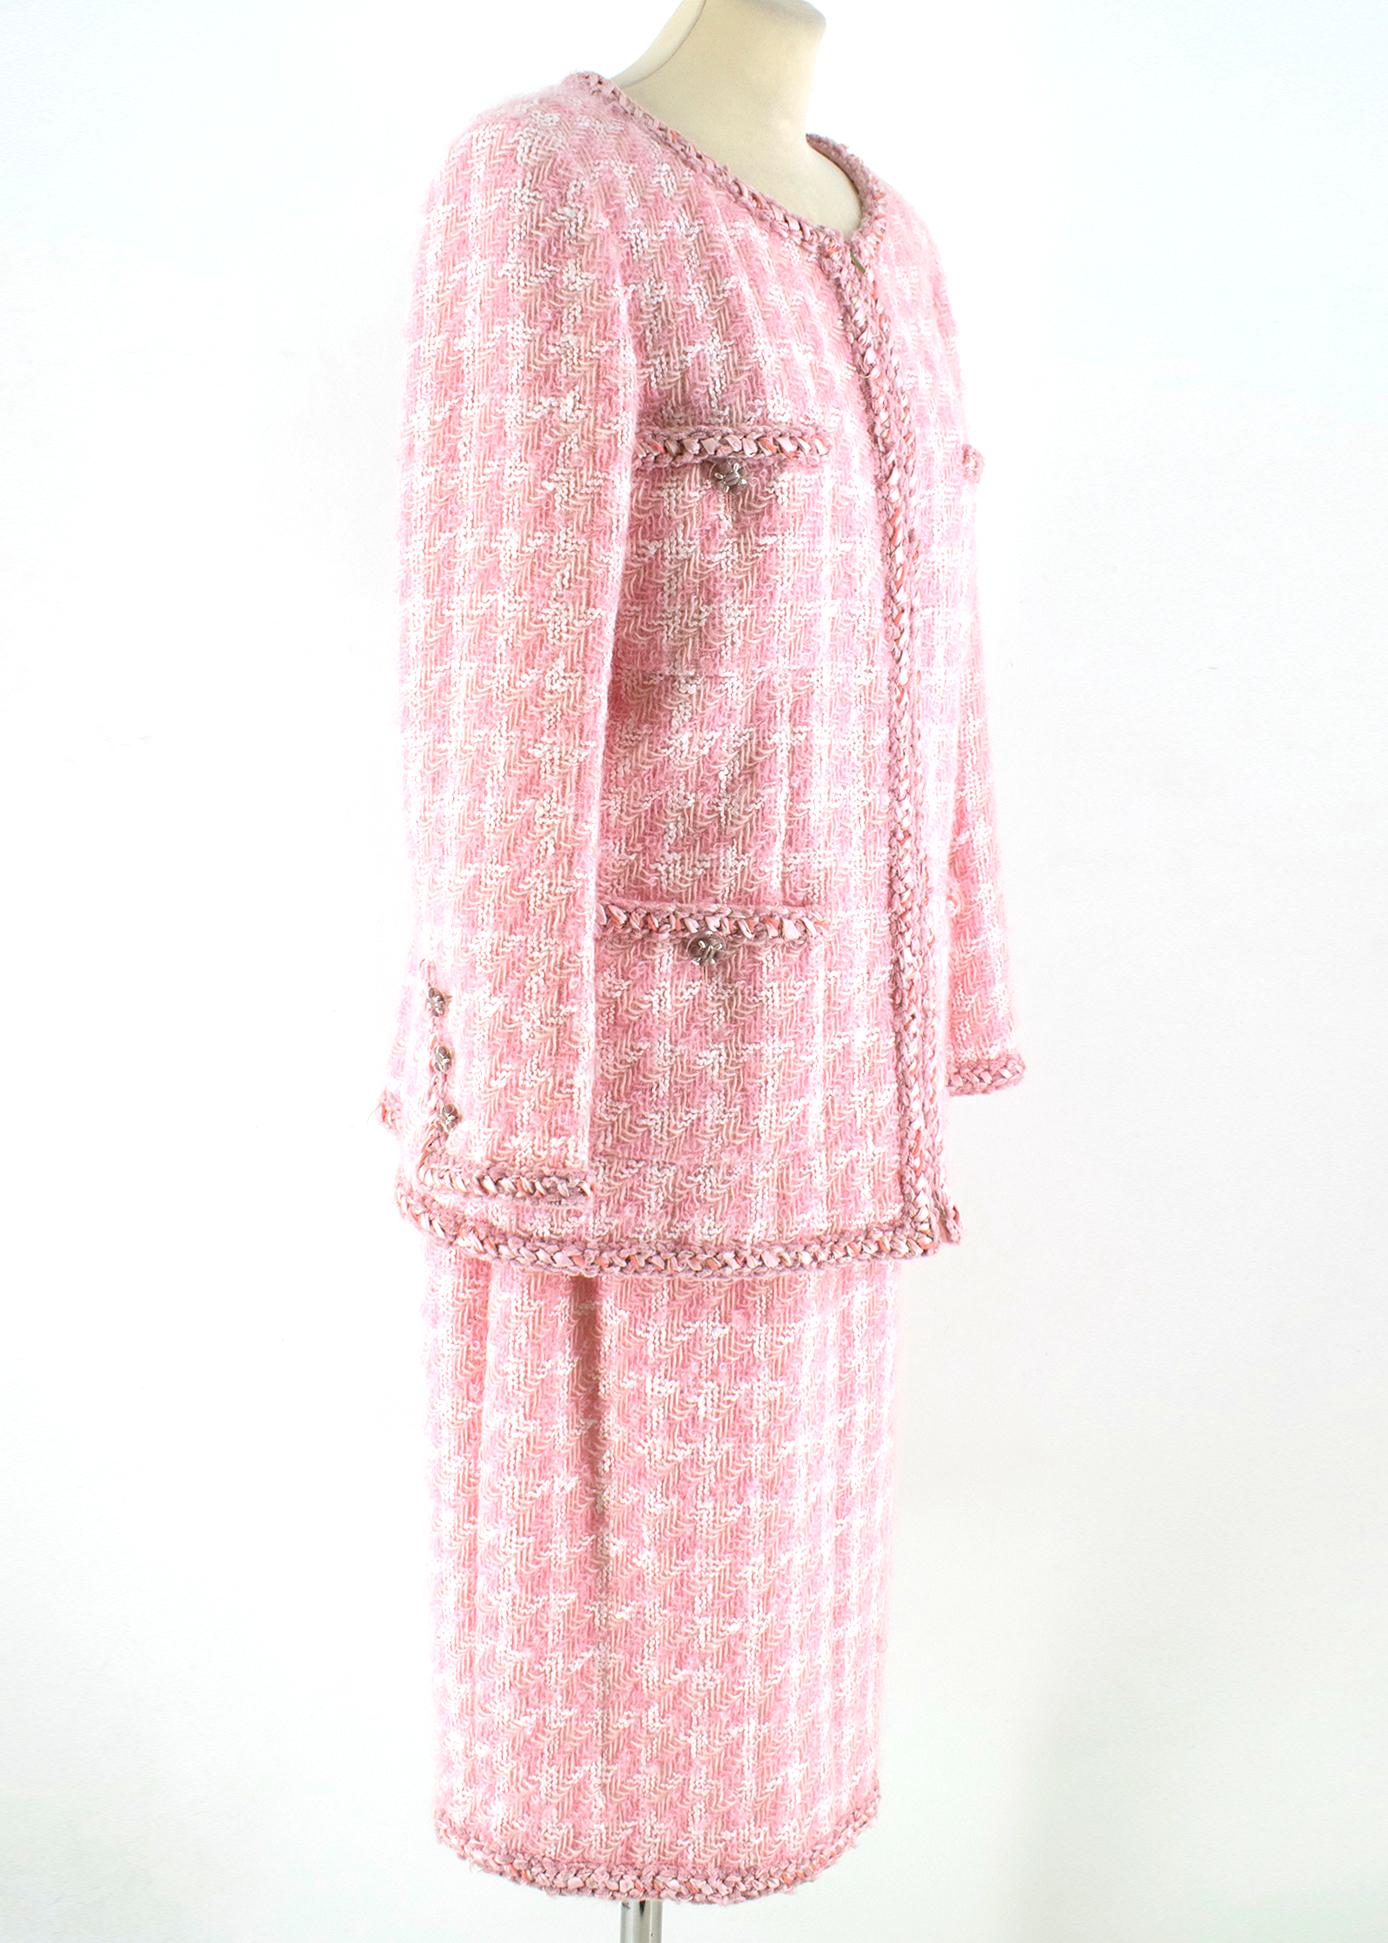 Chanel Pink & White Wool Tweed Skirt & Jacket

Blazer:

- Classic Chanel Tweed jacket 
- Silver tone zip fastening to the front
- Four front slip pockets with buttons
- Round neck 
- Light shoulder padding 
- Braid embellishing to the trims
- Silk